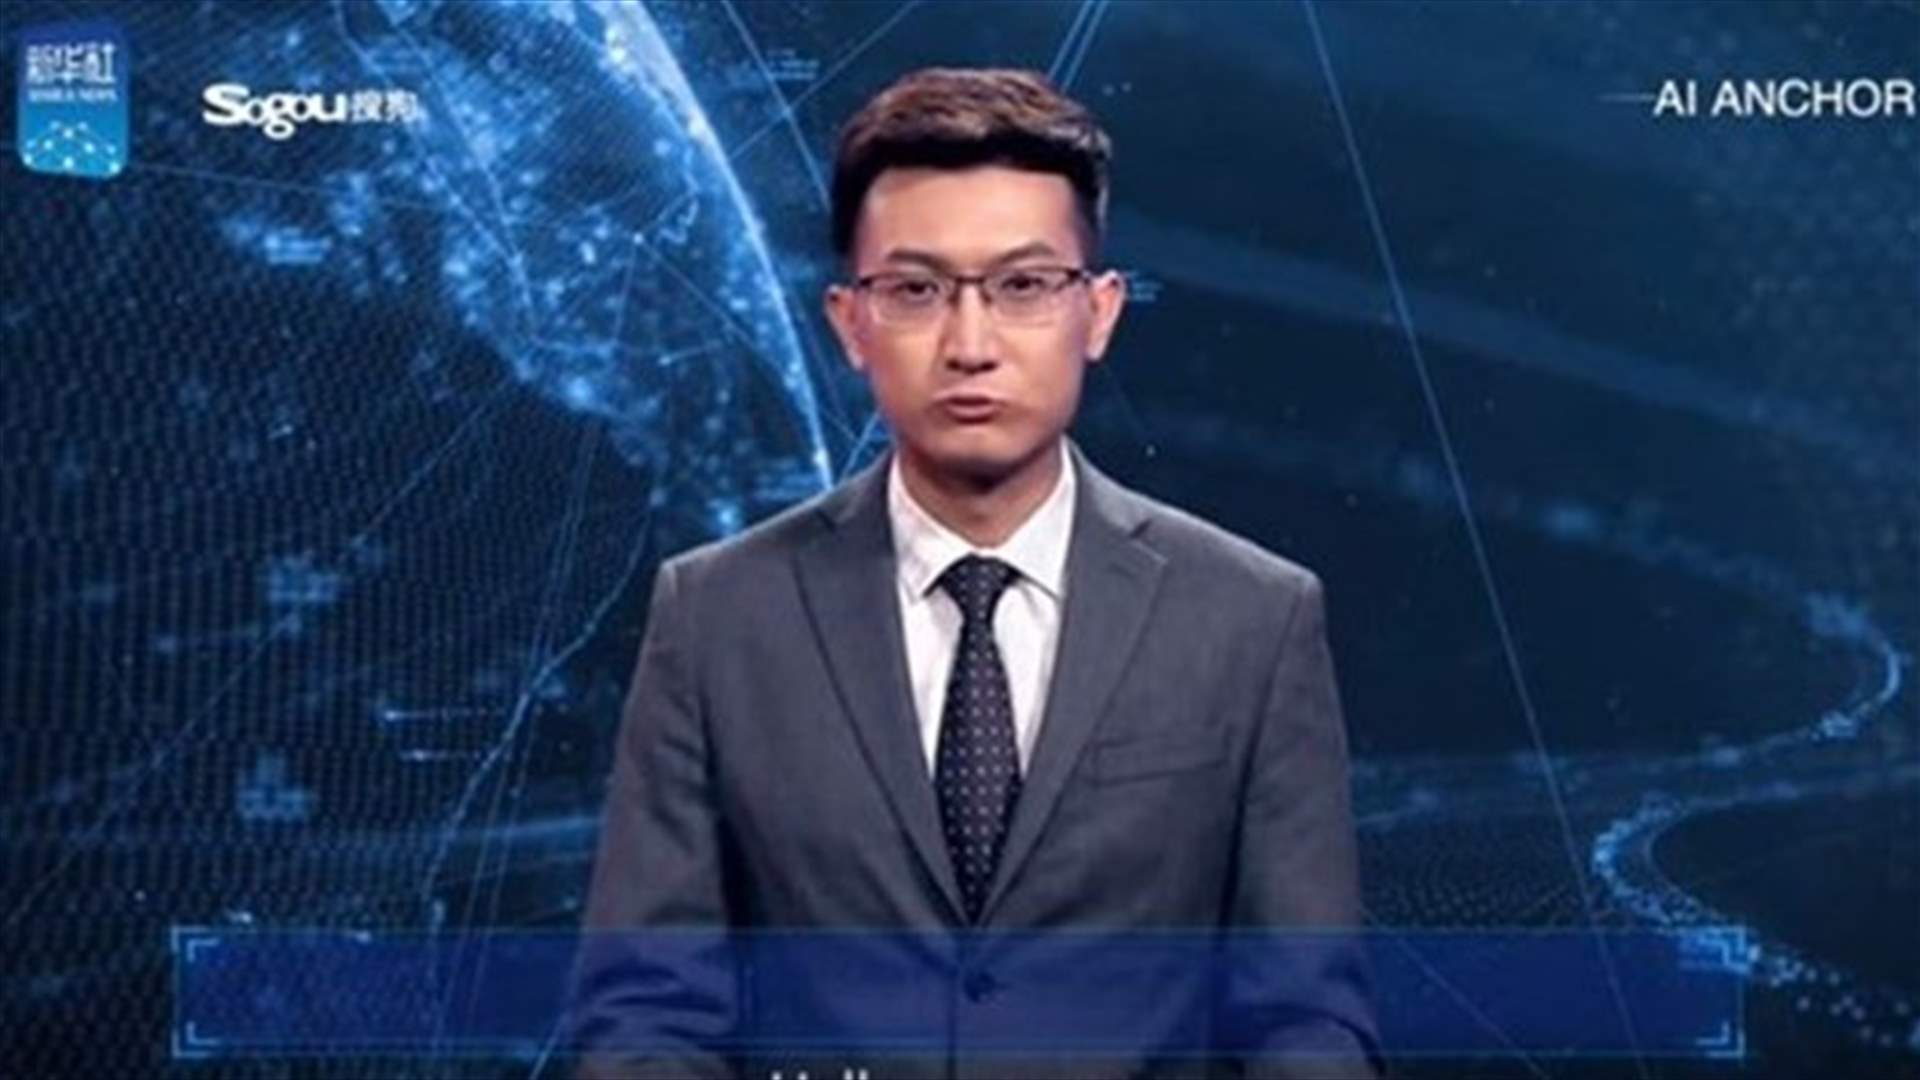 And Now For Something Completely Different: Chinese Robot News Readers - [VIDEO]